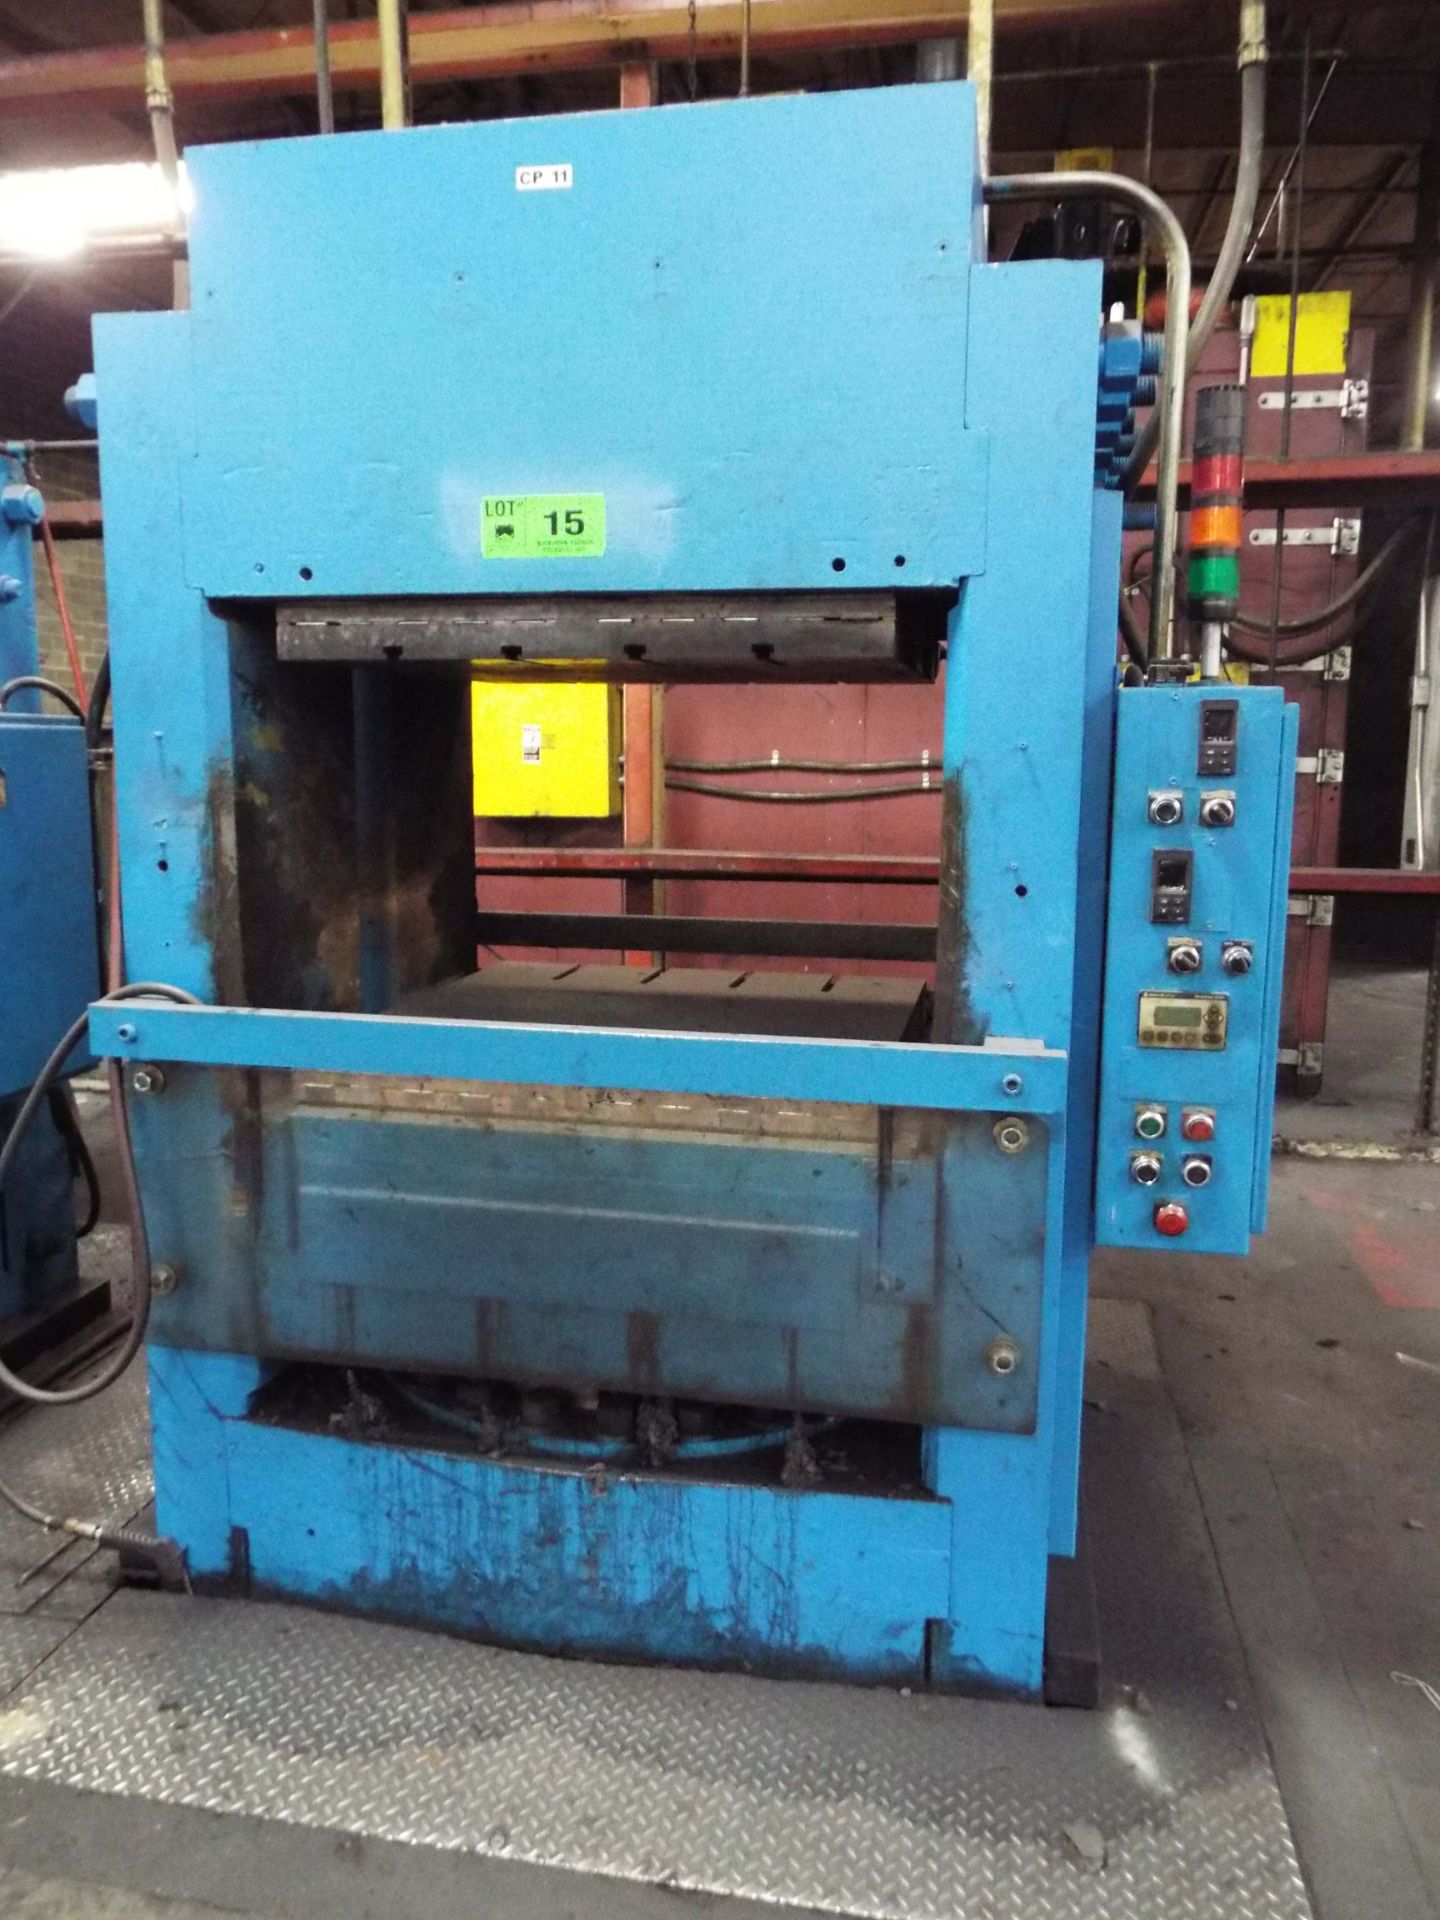 MFG. UNKNOWN HYDRAULIC MOLD PRESS WITH 36"X36" ELECTRIC HEATED PLATENS, ALLEN-BRADLEY PANELVIEW C200